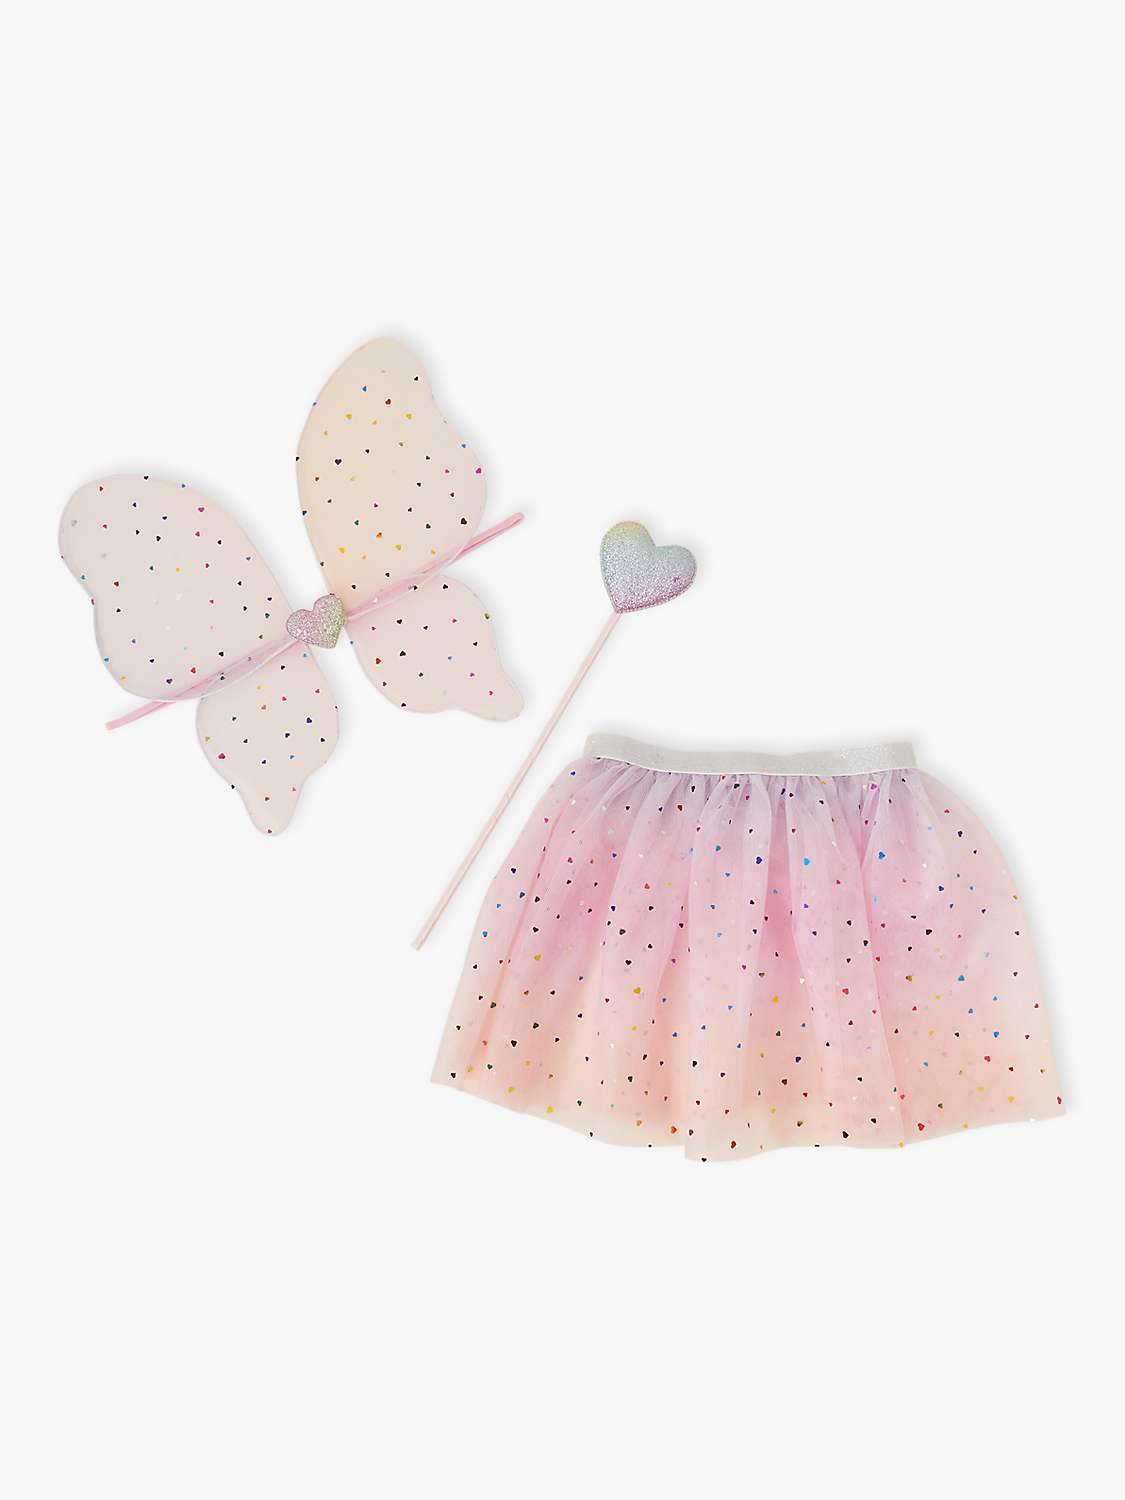 Buy Angels by Accessorize Kids' Heart Print Tutu, Wings & Wand Dress Up Set, Pink/Multi Online at johnlewis.com